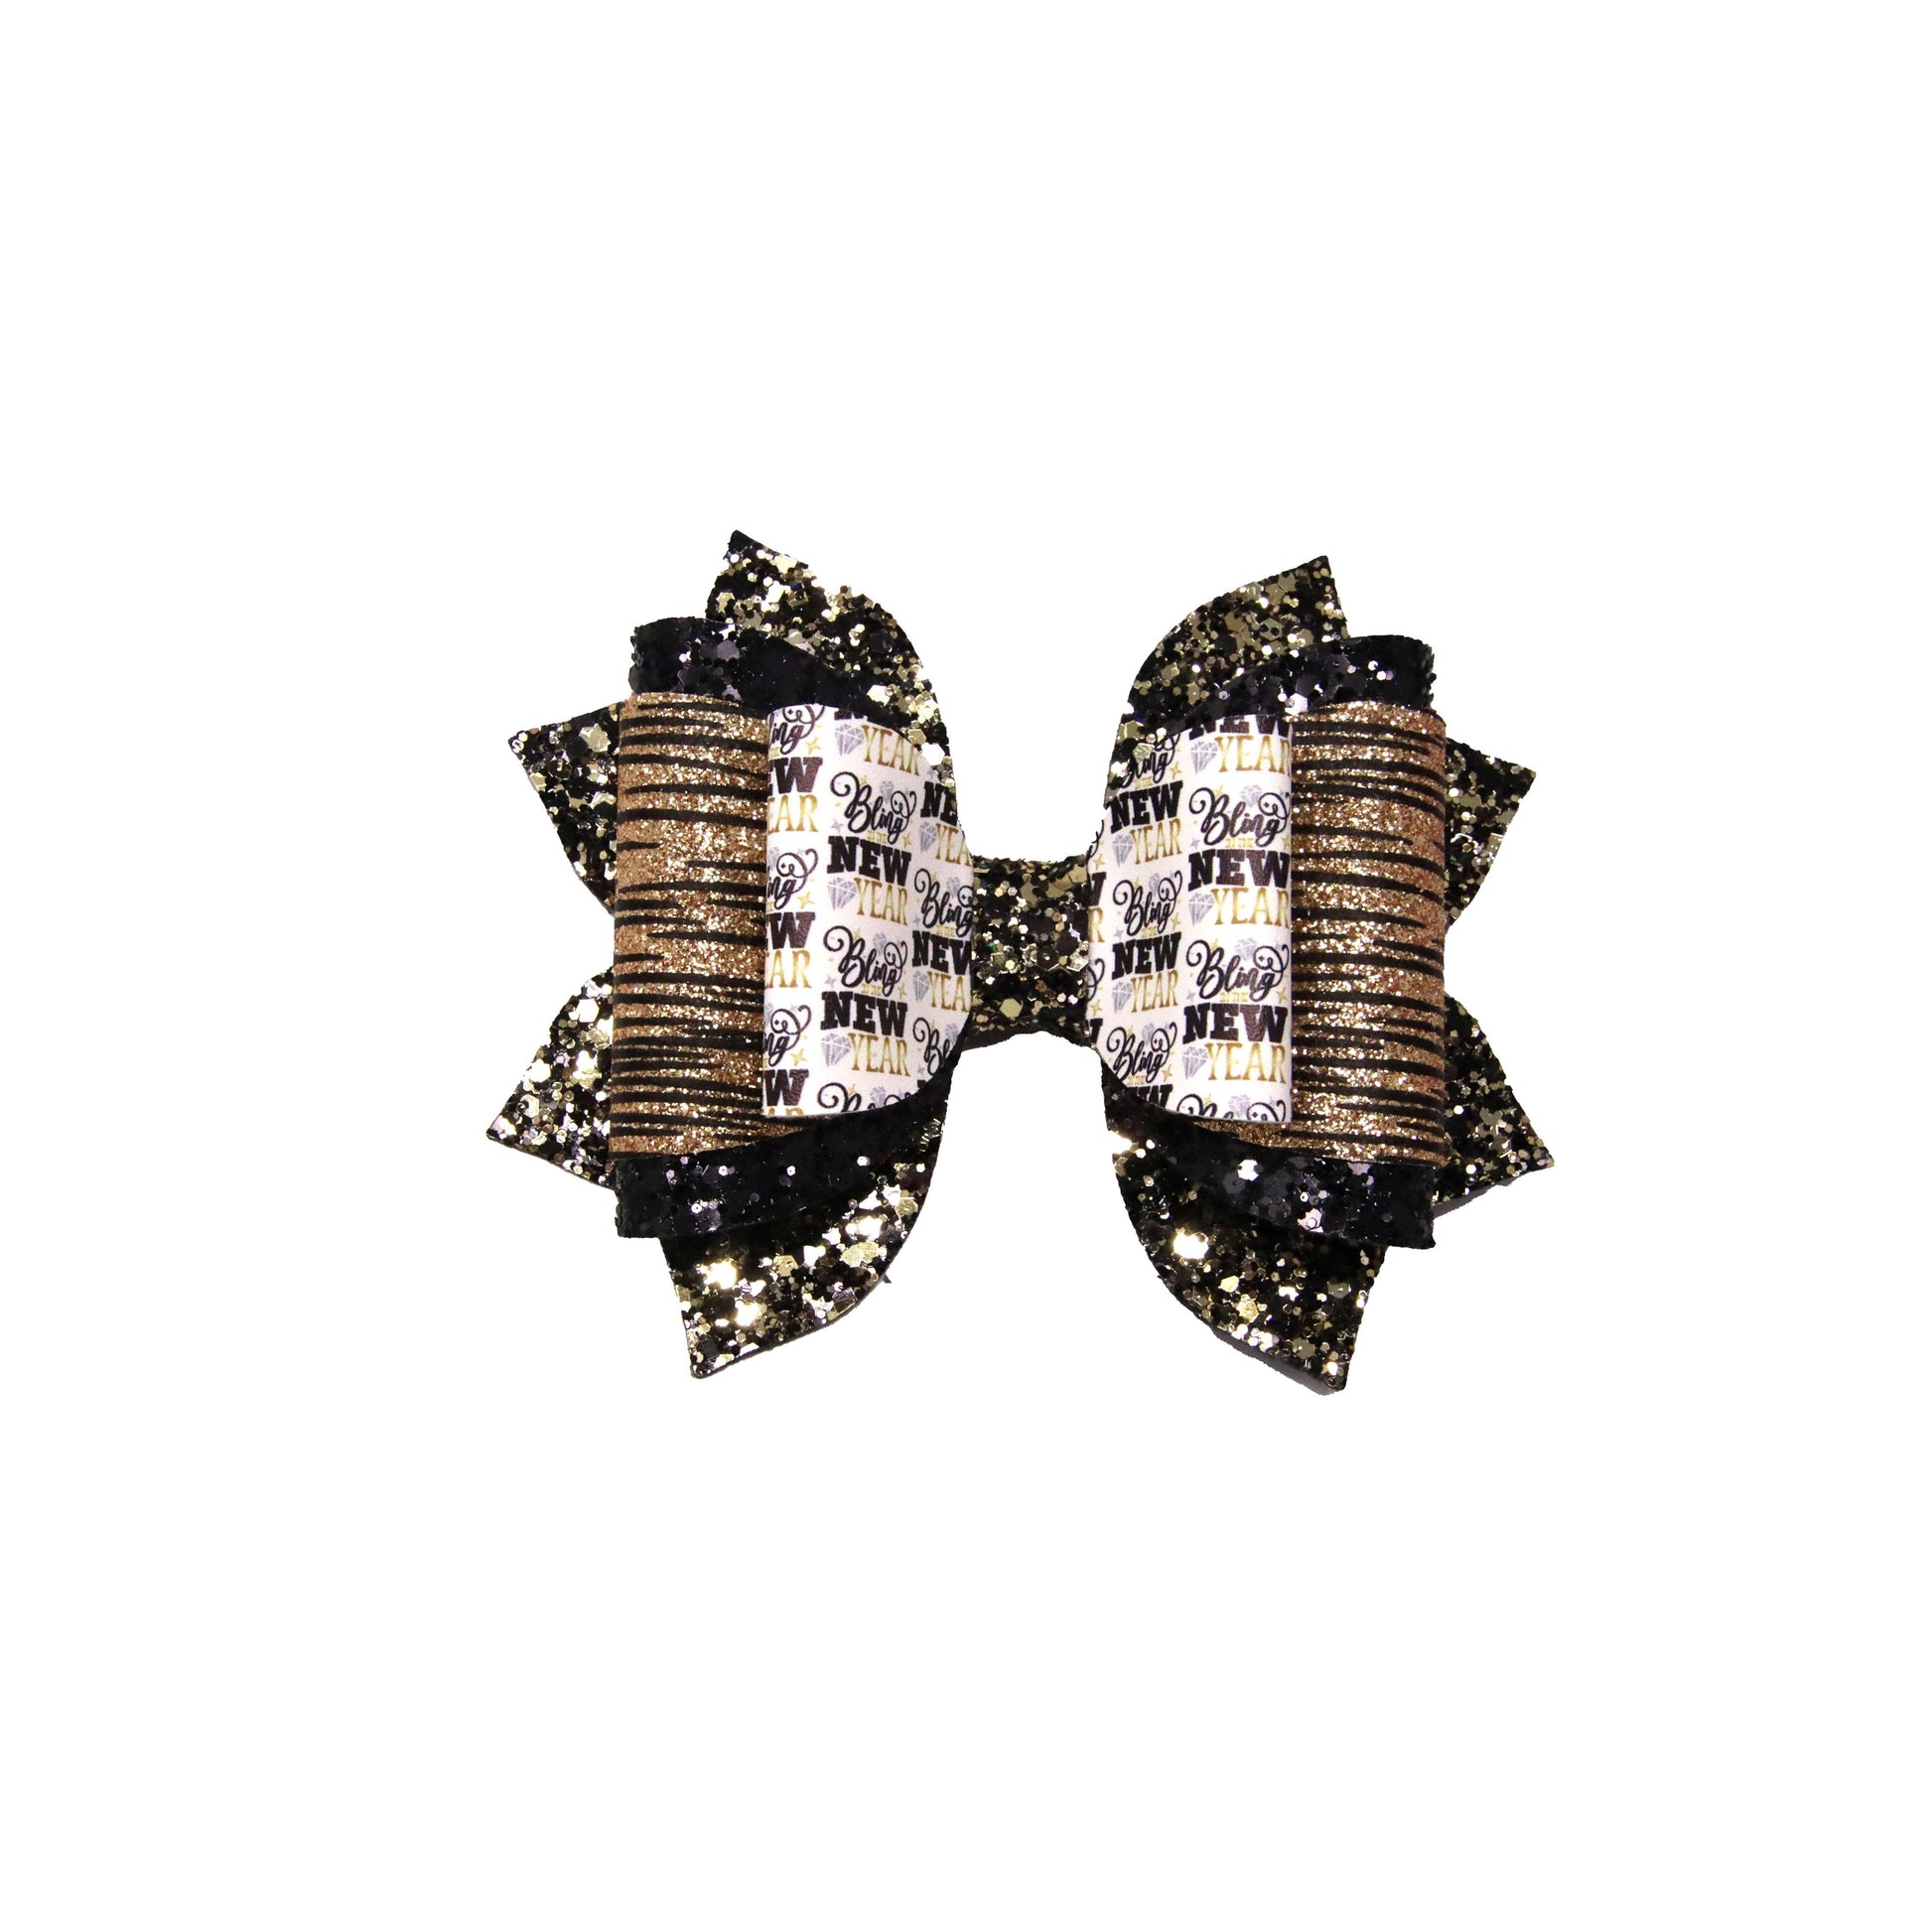 Bling in the New Year Double Dressed-up Elegant Bow 5"